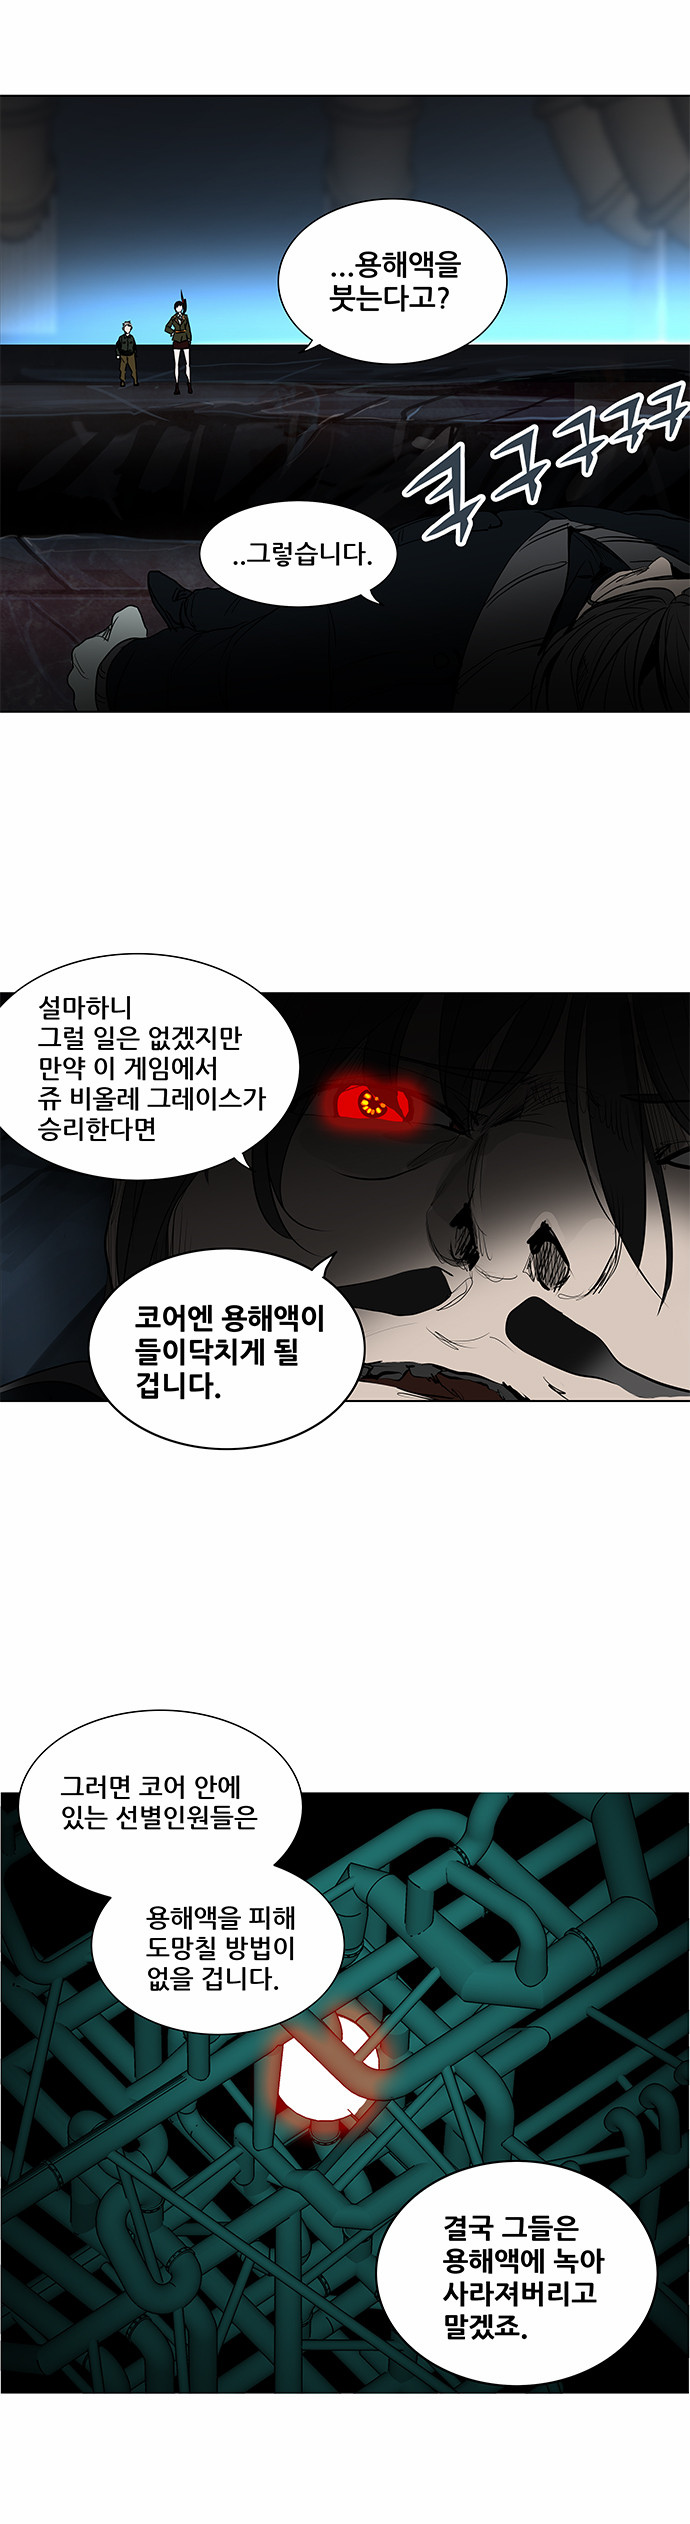 Tower of God - Chapter 275 - Page 1